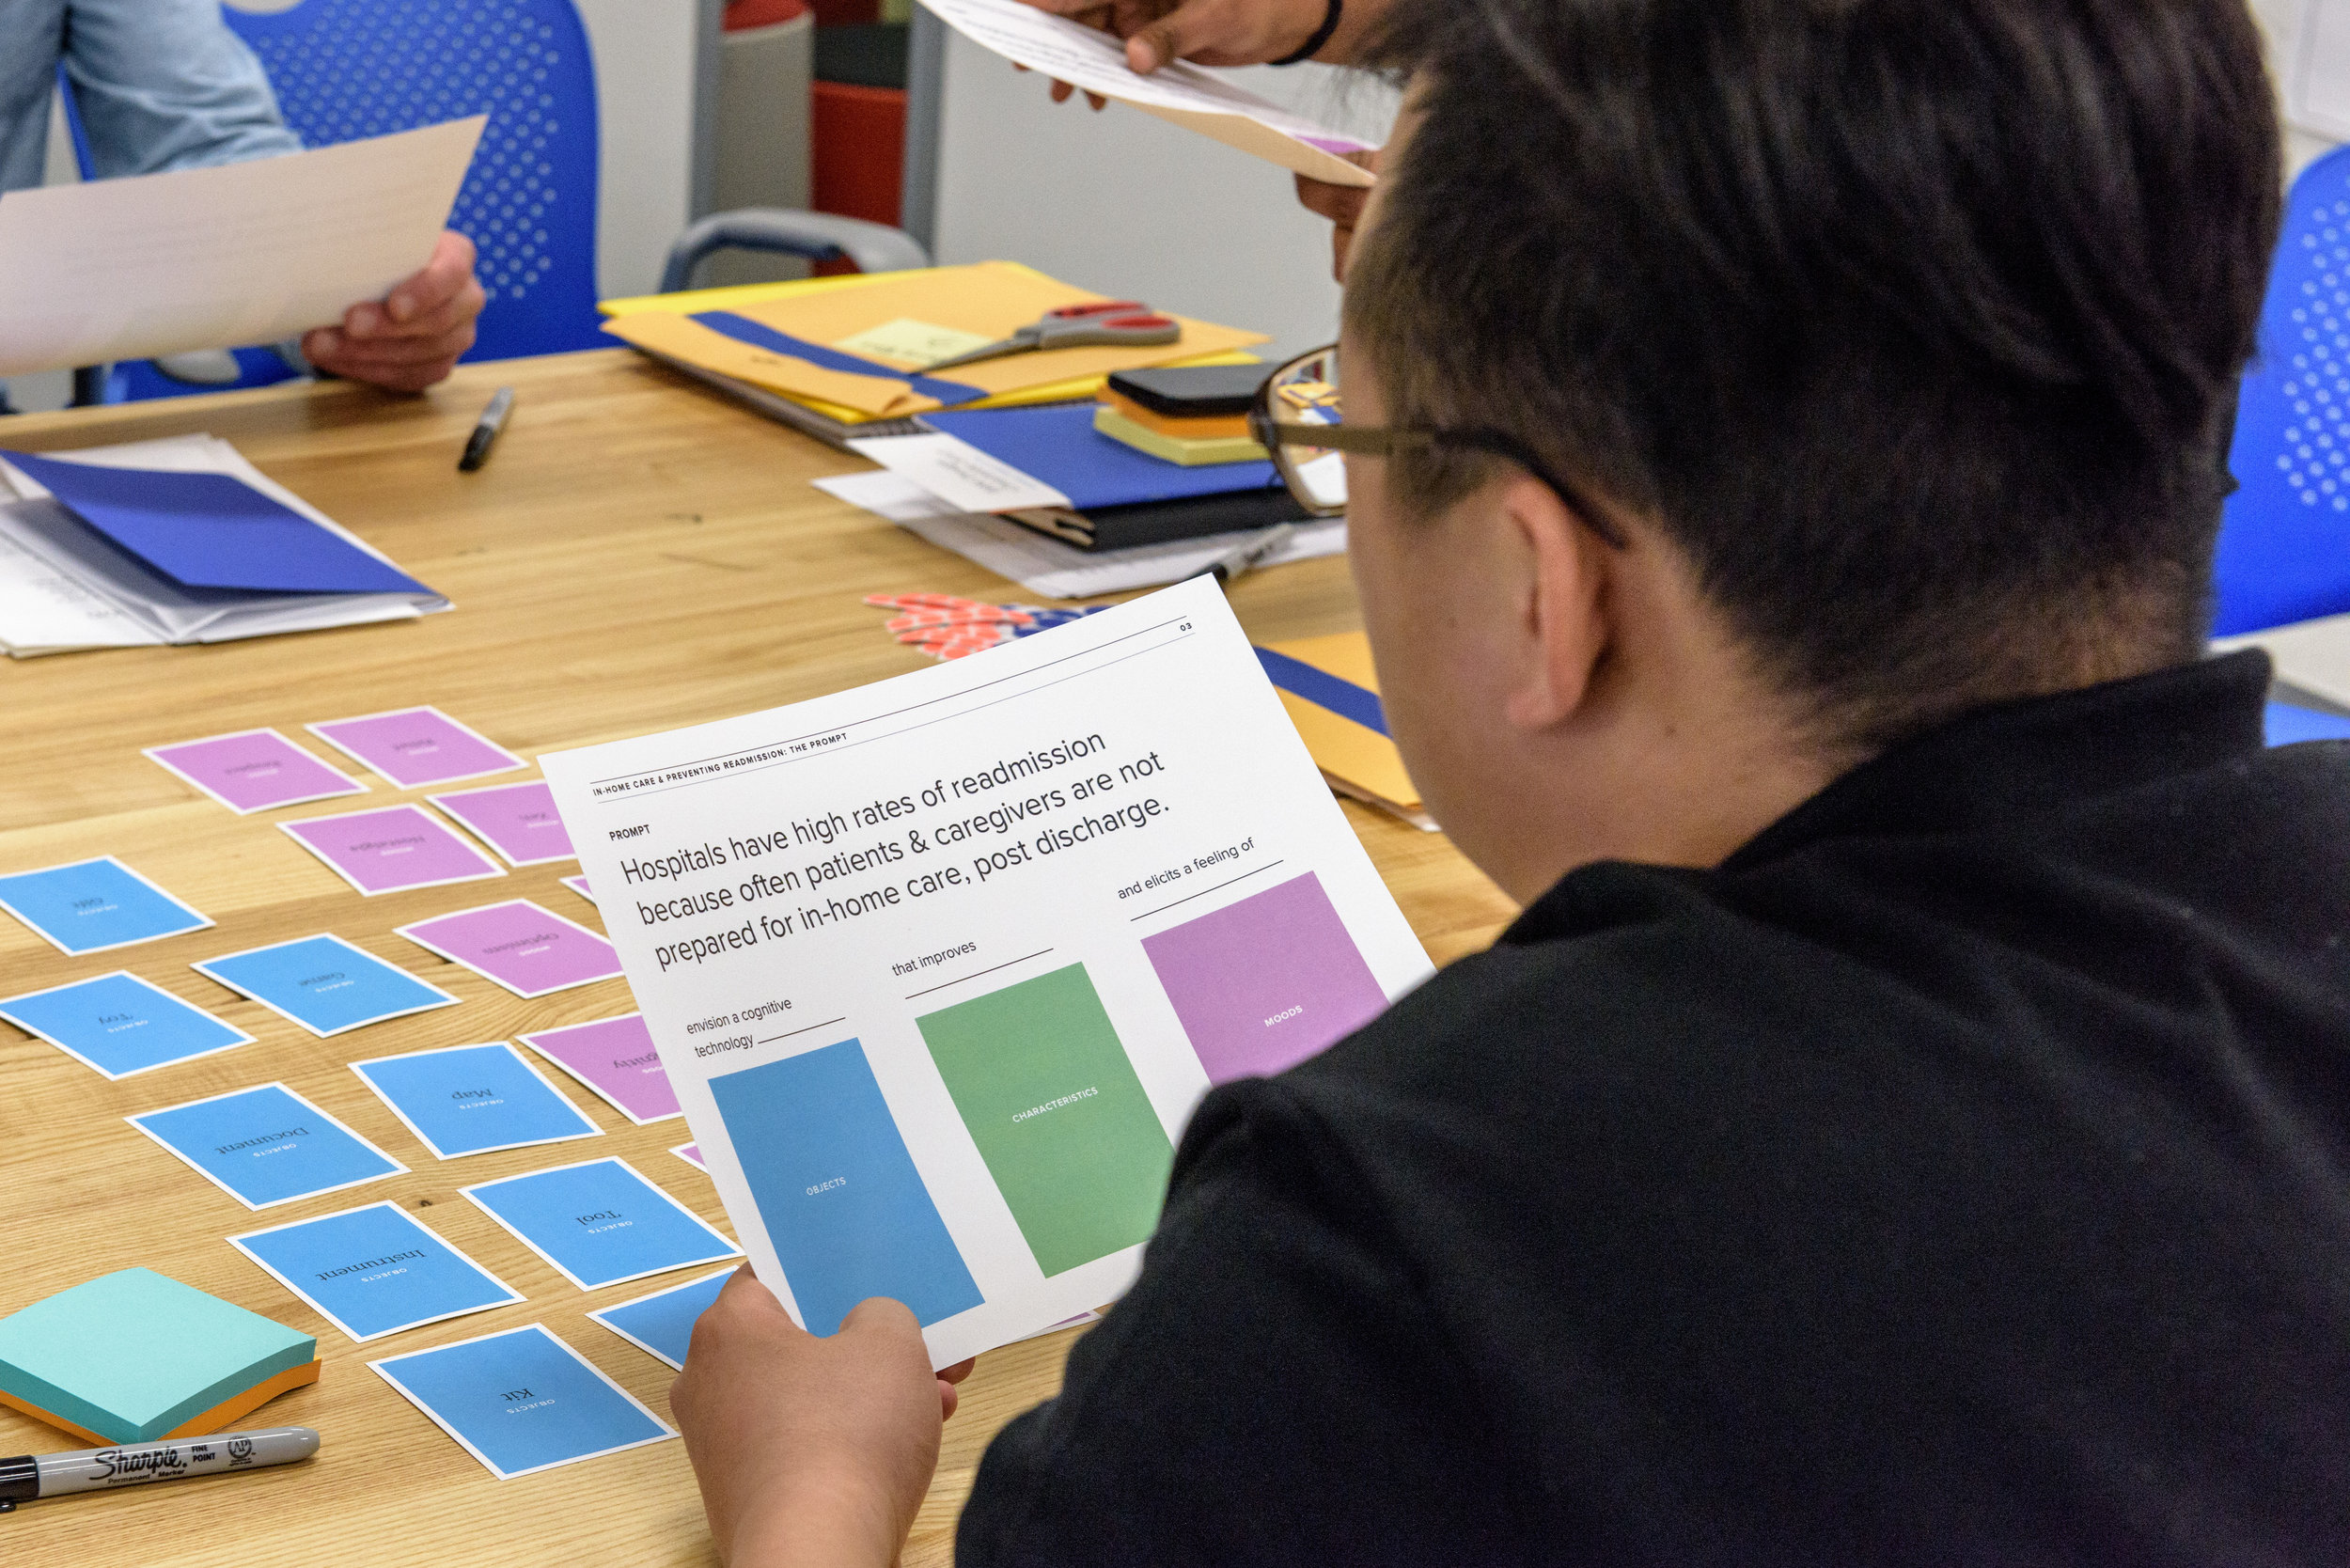 We modified Stuart Candy's "Thing from the Future," to create a brainstorming card game.